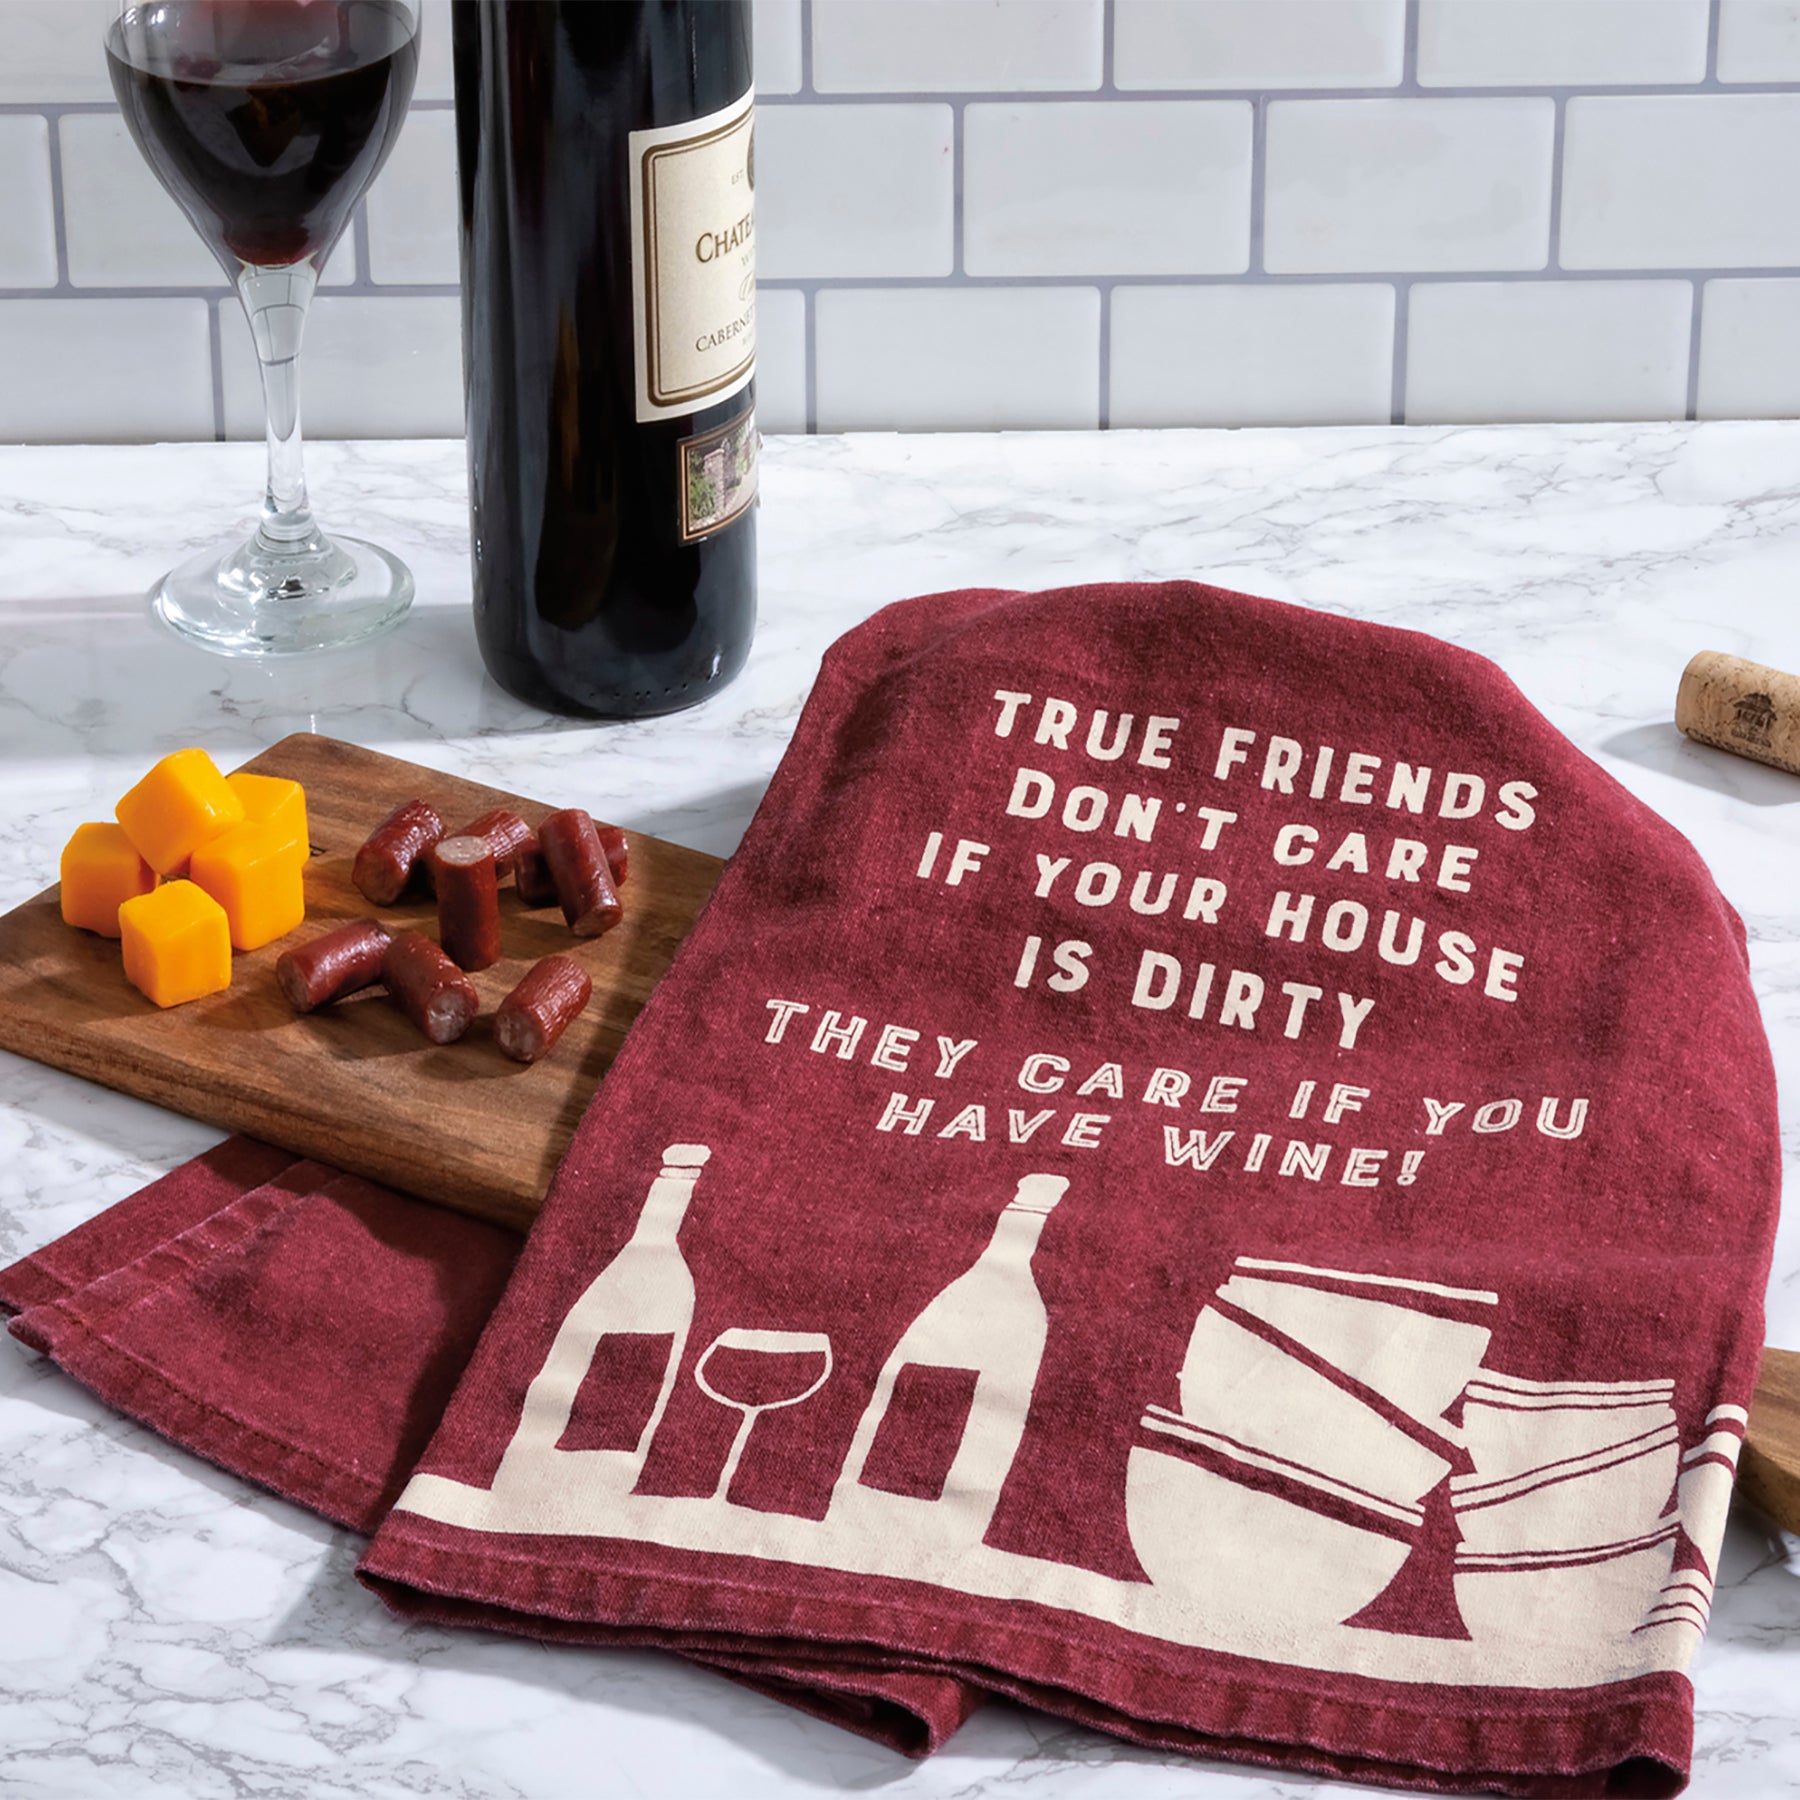 True Friends Don't Care If Your House Is Dirty Dish Cloth Towel | Novelty Tea Towel | Cute Kitchen Hand Towel | 28" x 28"